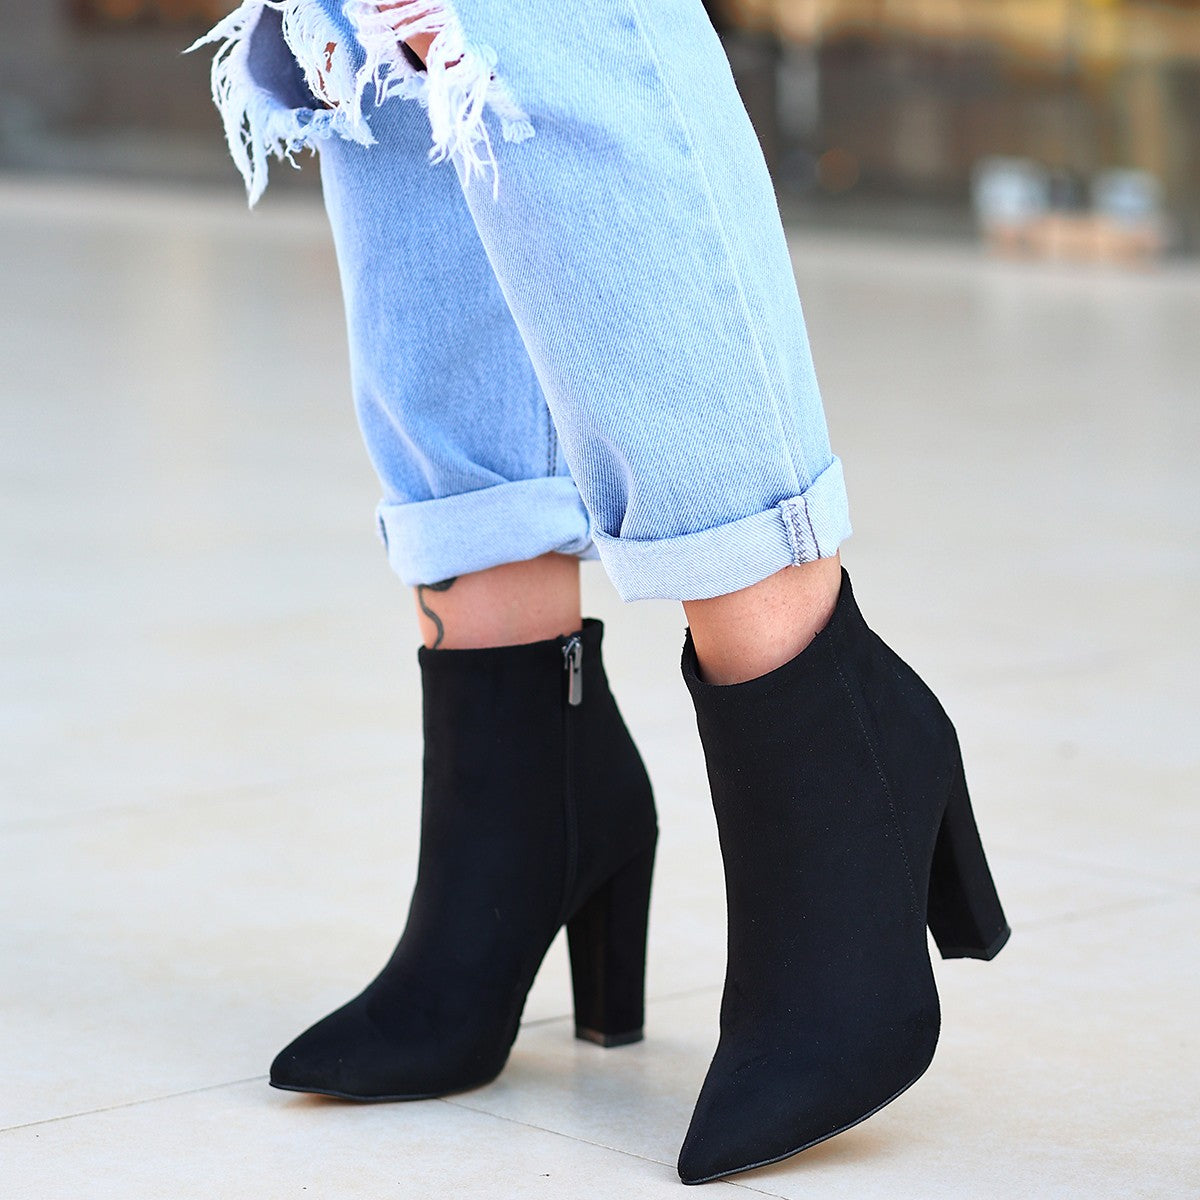 Women's Black Suede Heeled Boots - STREETMODE ™